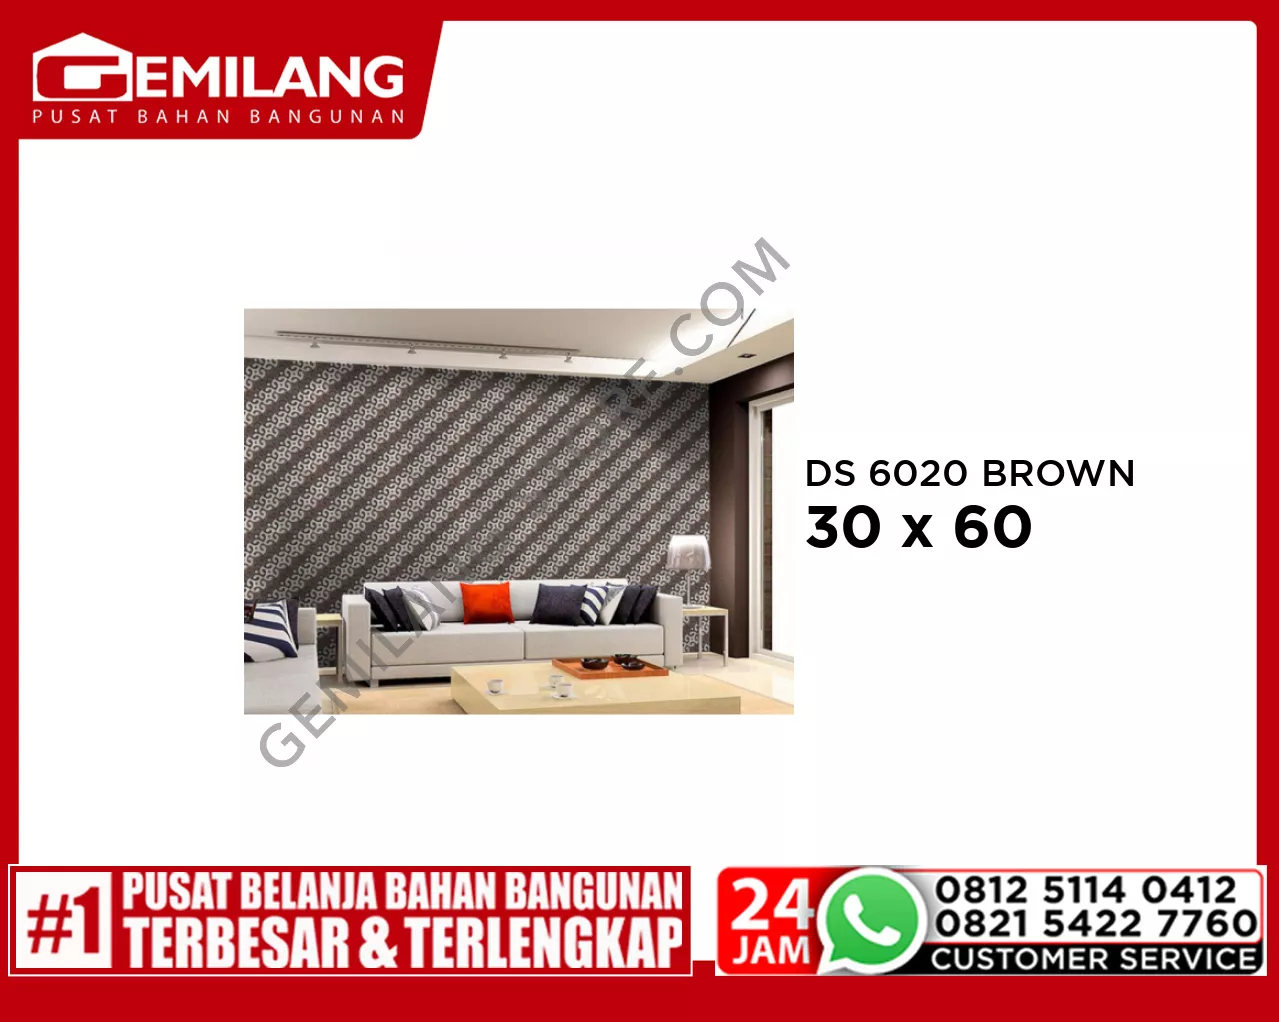 CENTRO DS 6020 BROWN 30 x 60